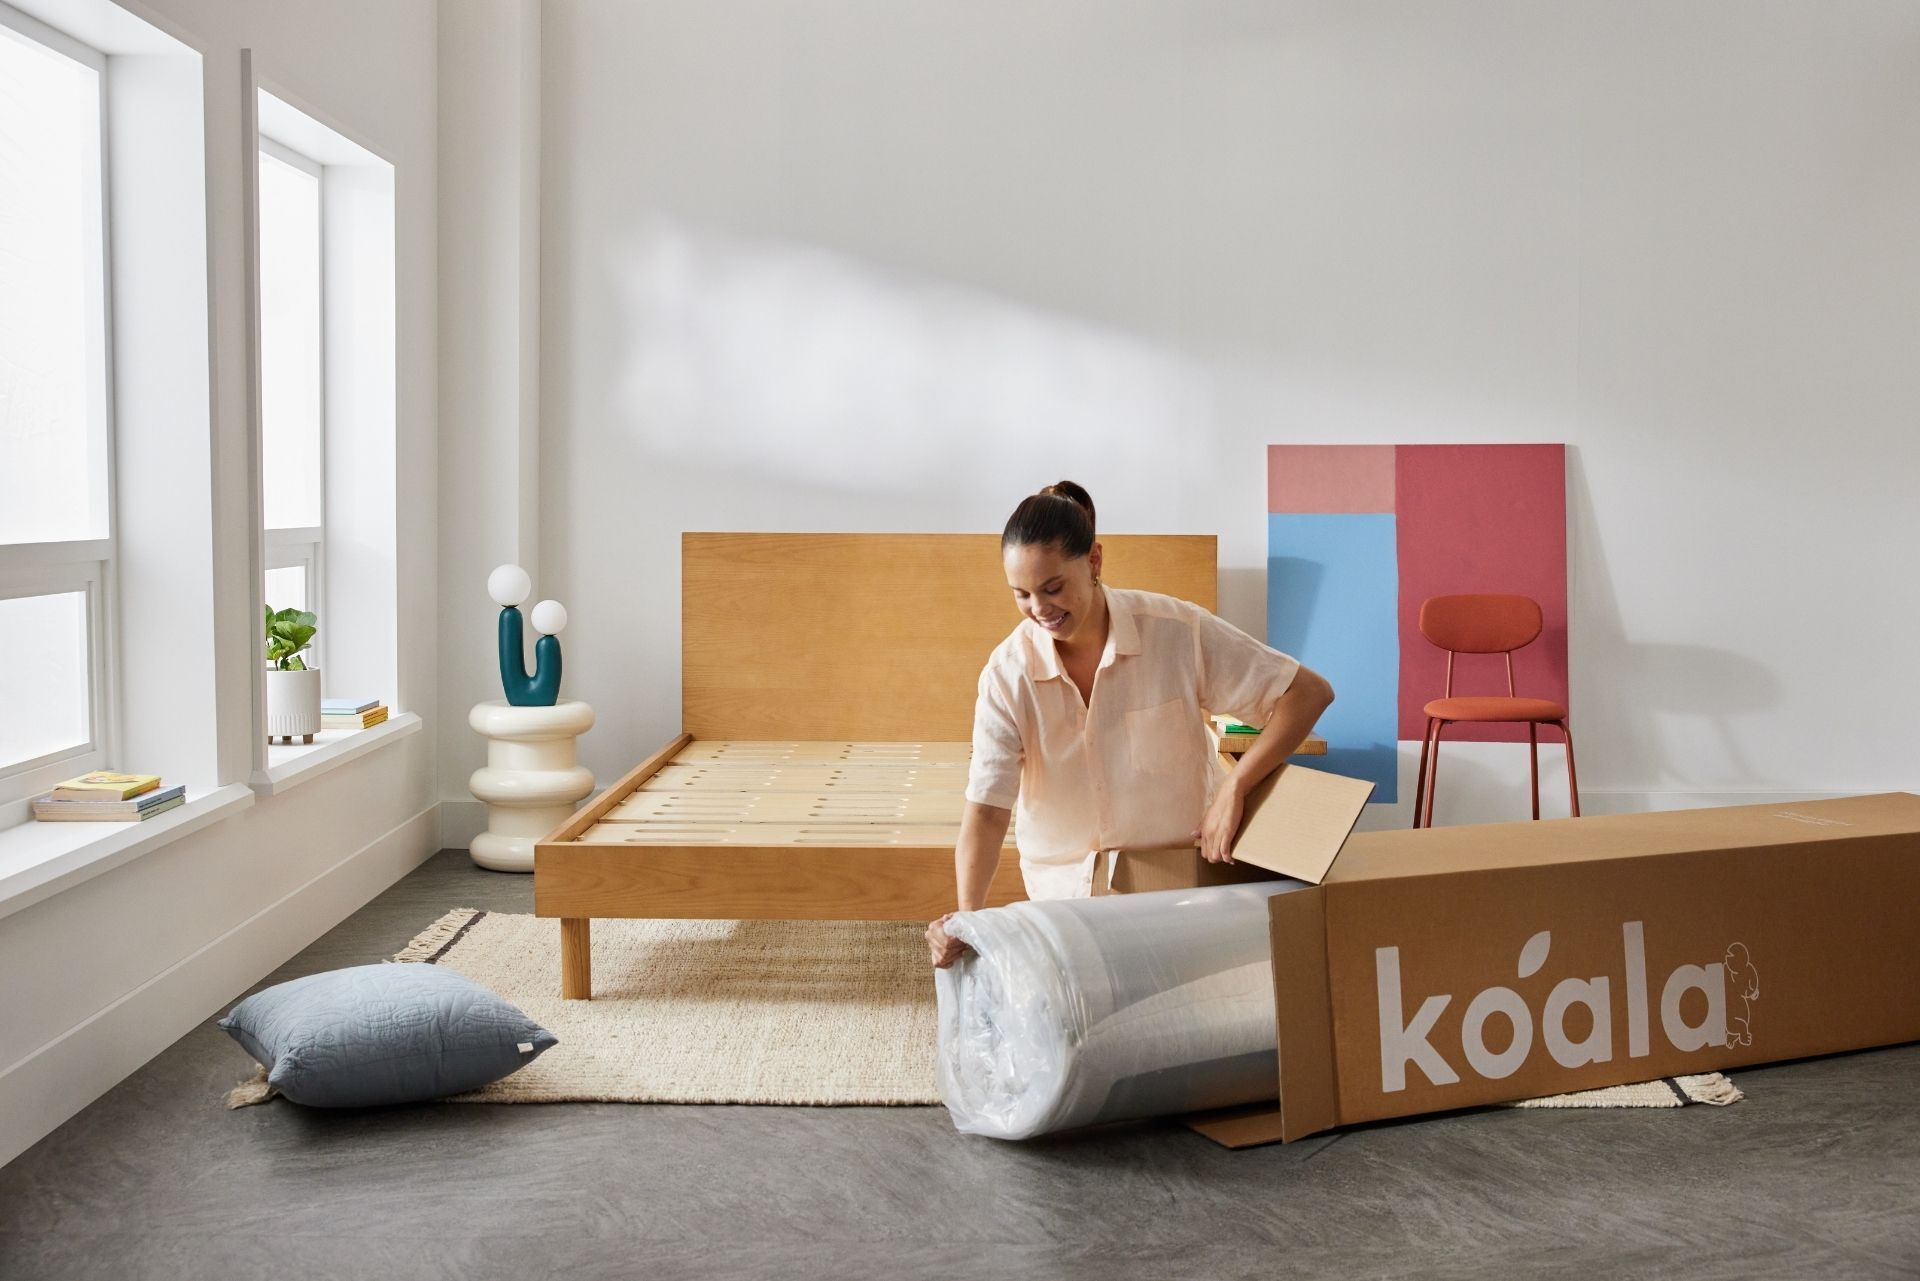 A young woman unpacks her new Koala mattress in a bright and airy bedroom